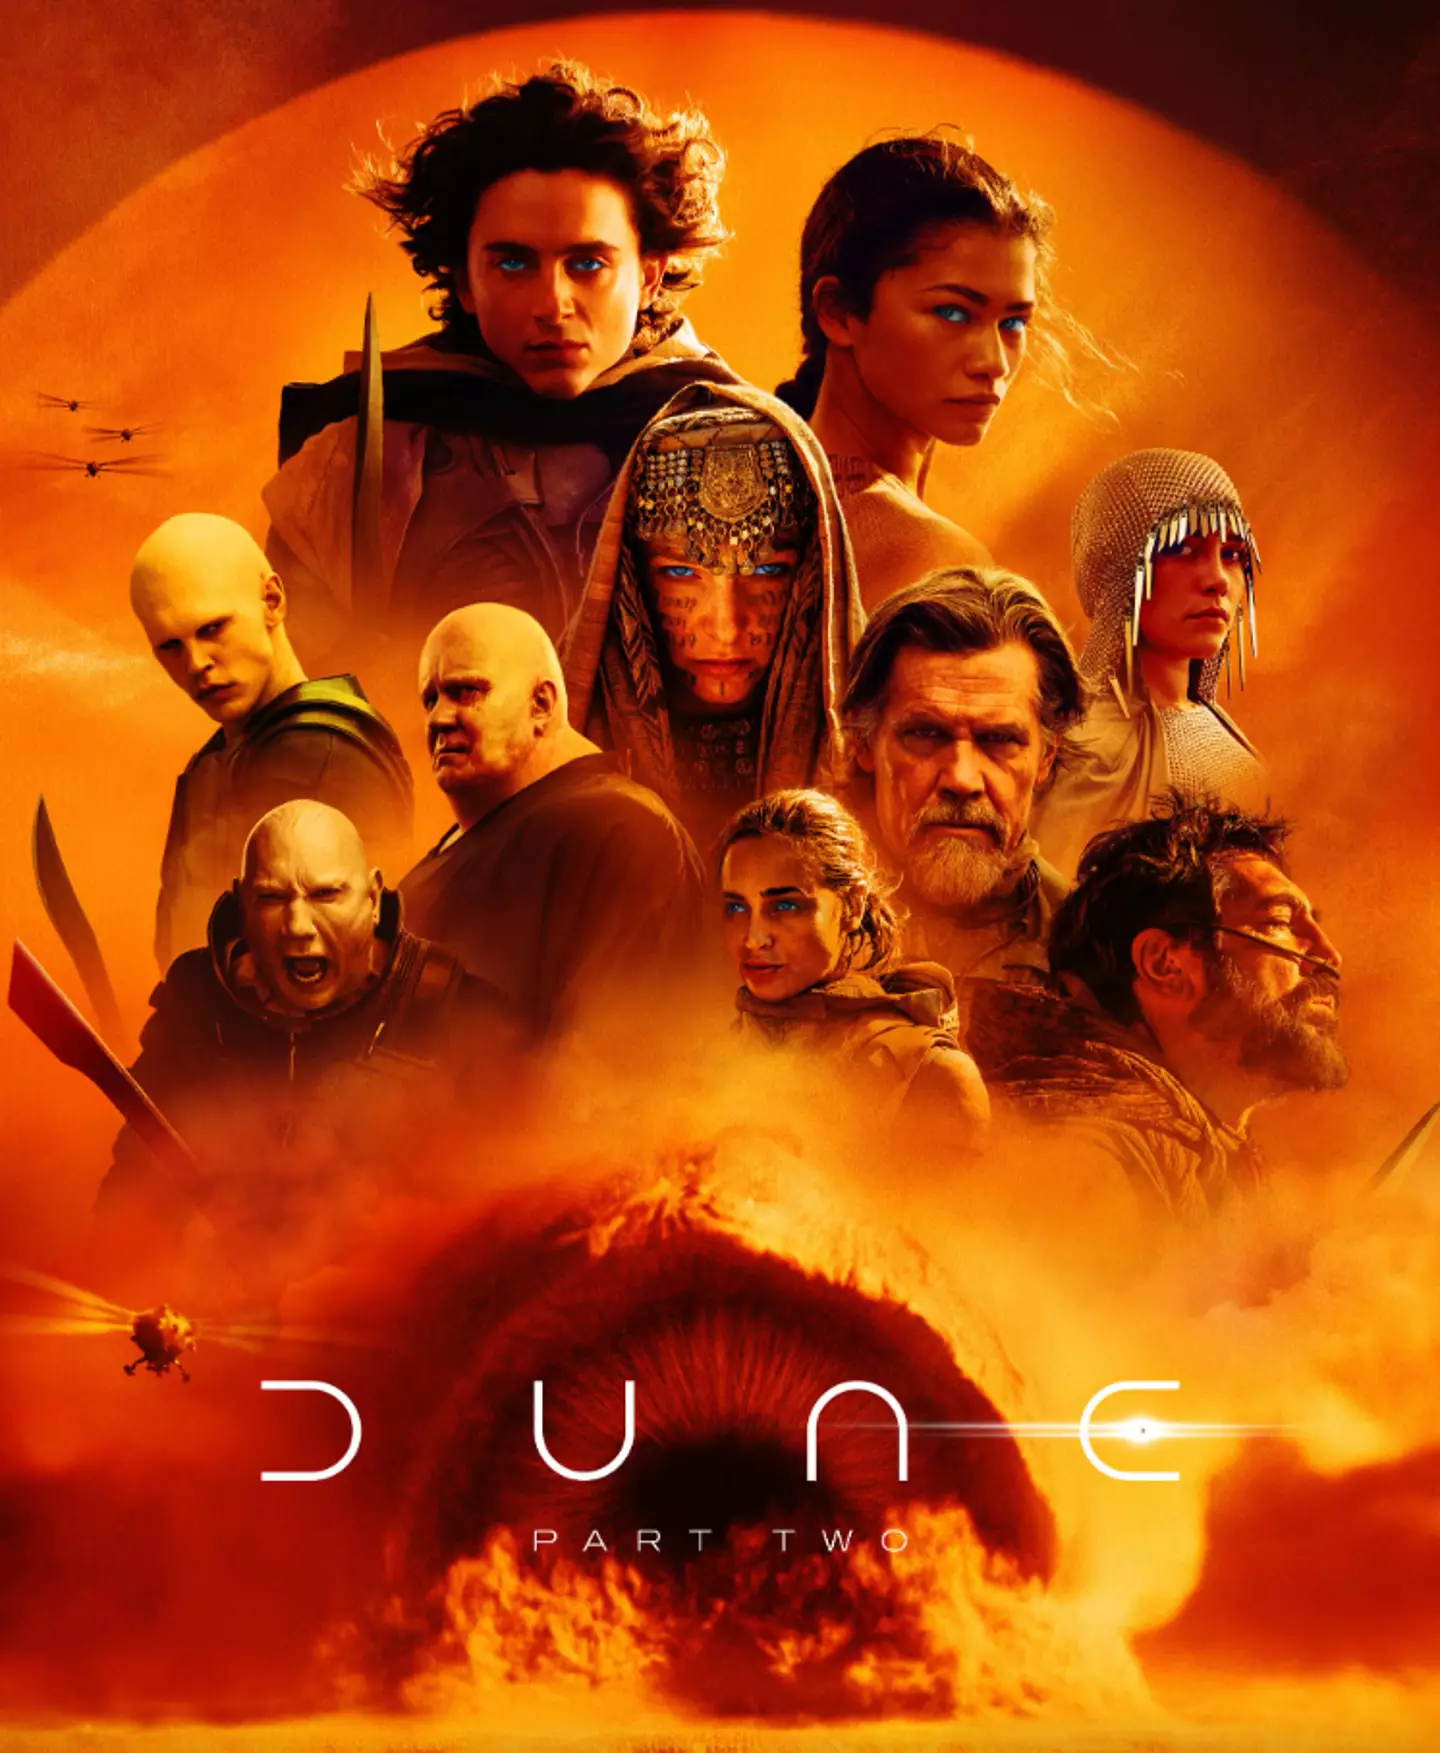 Dune: Part 2 comes out today and fans and critics can’t sing its praises enough.